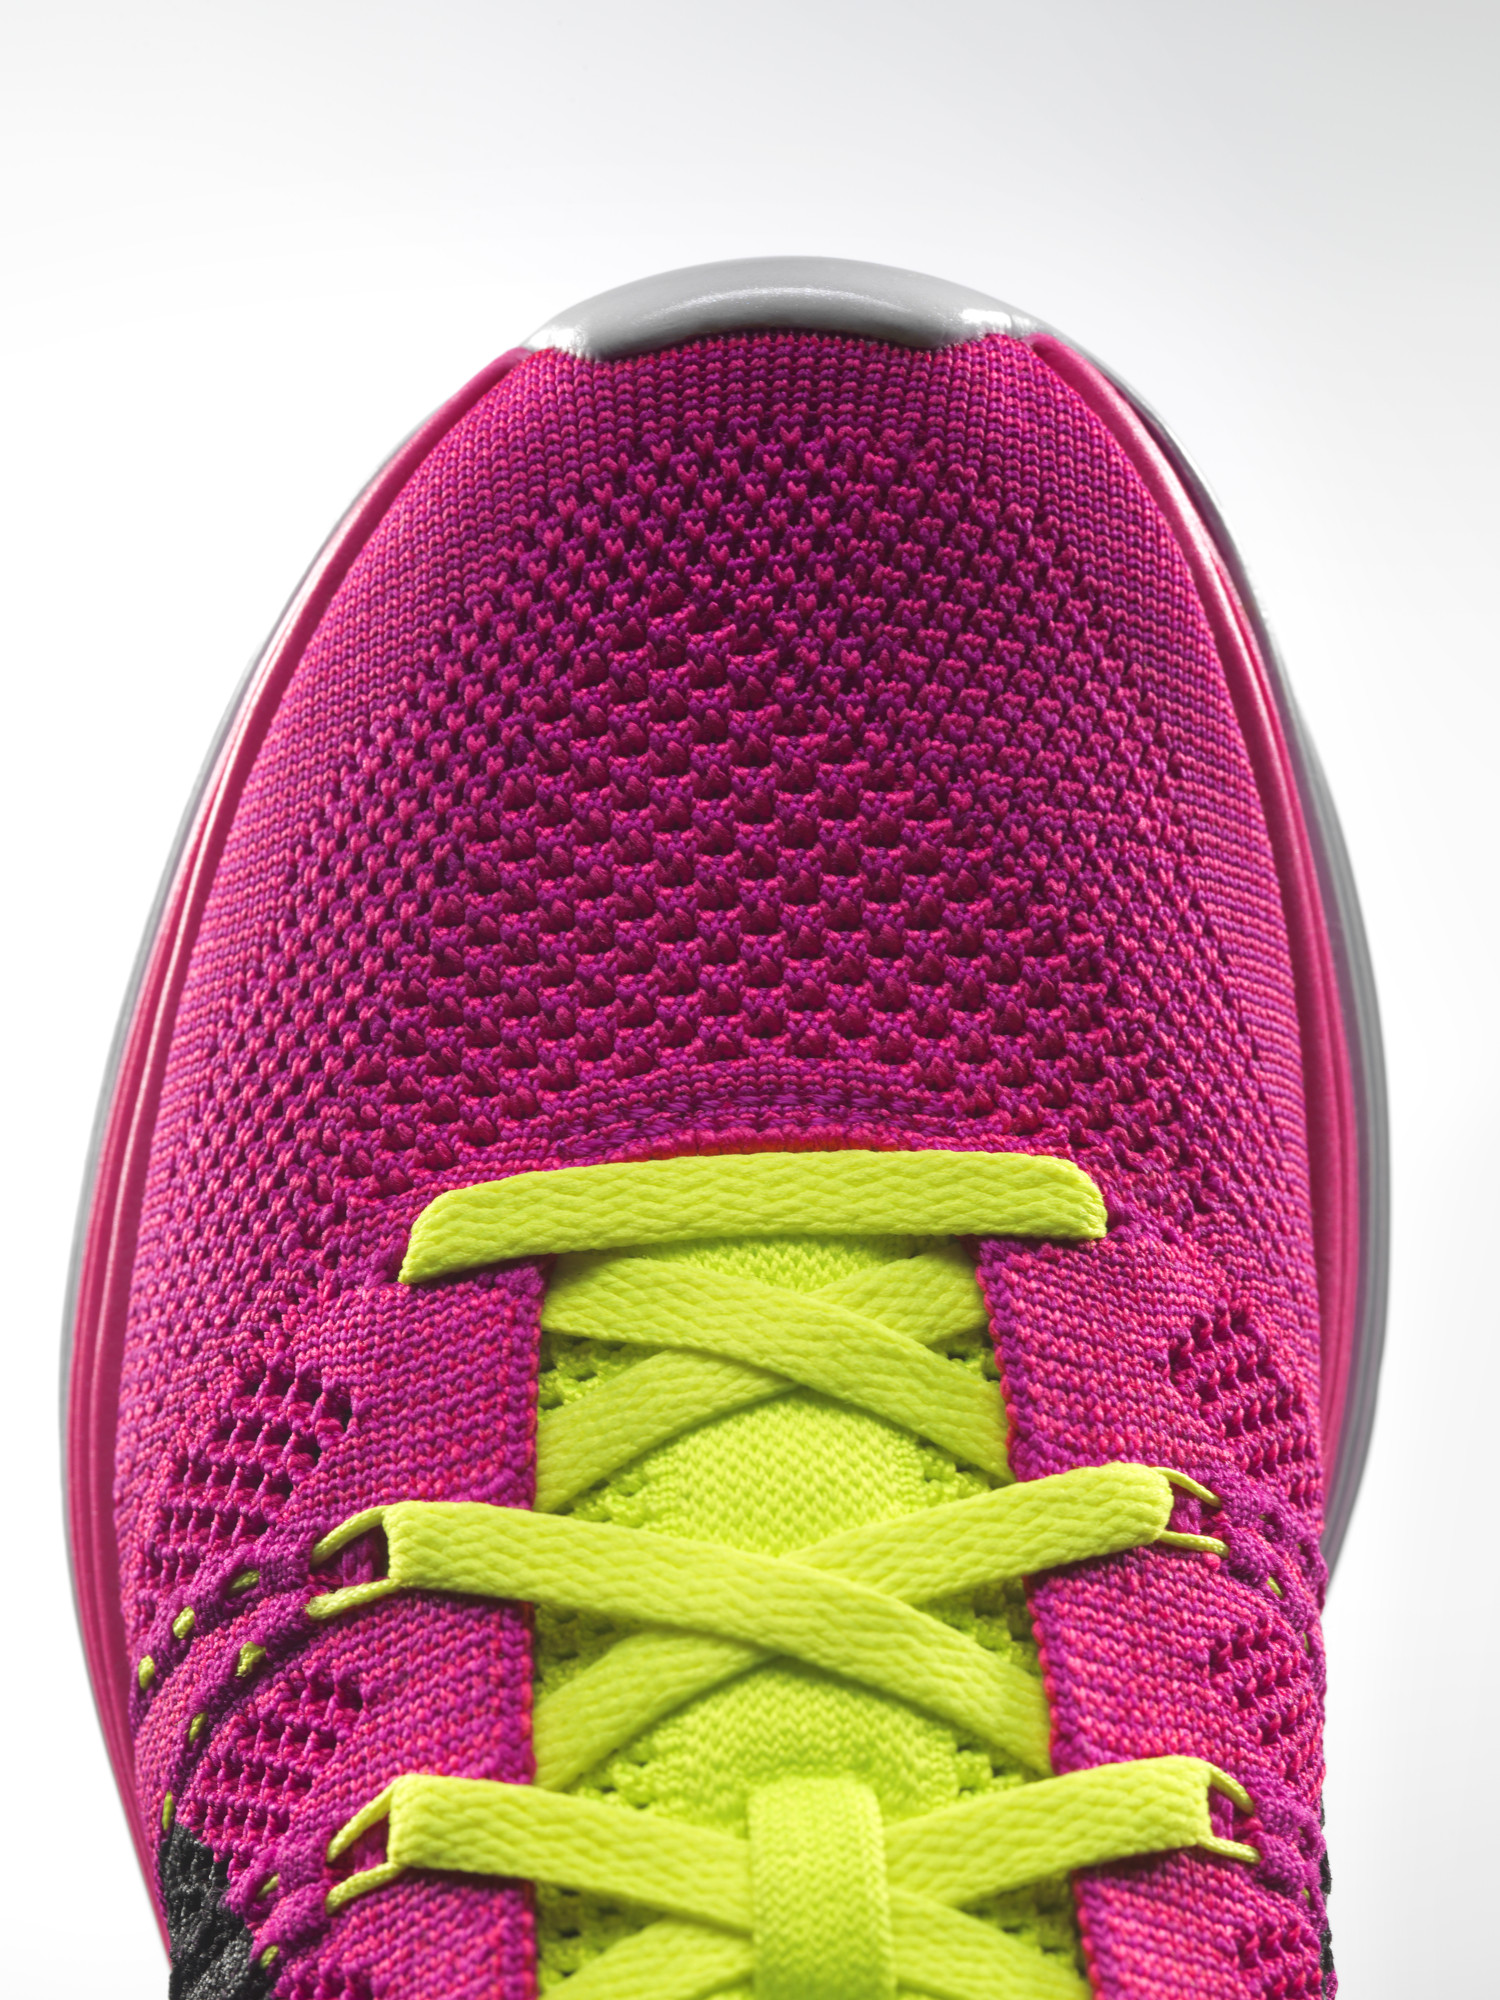 NIKE: 80% less waste for new Flyknit 